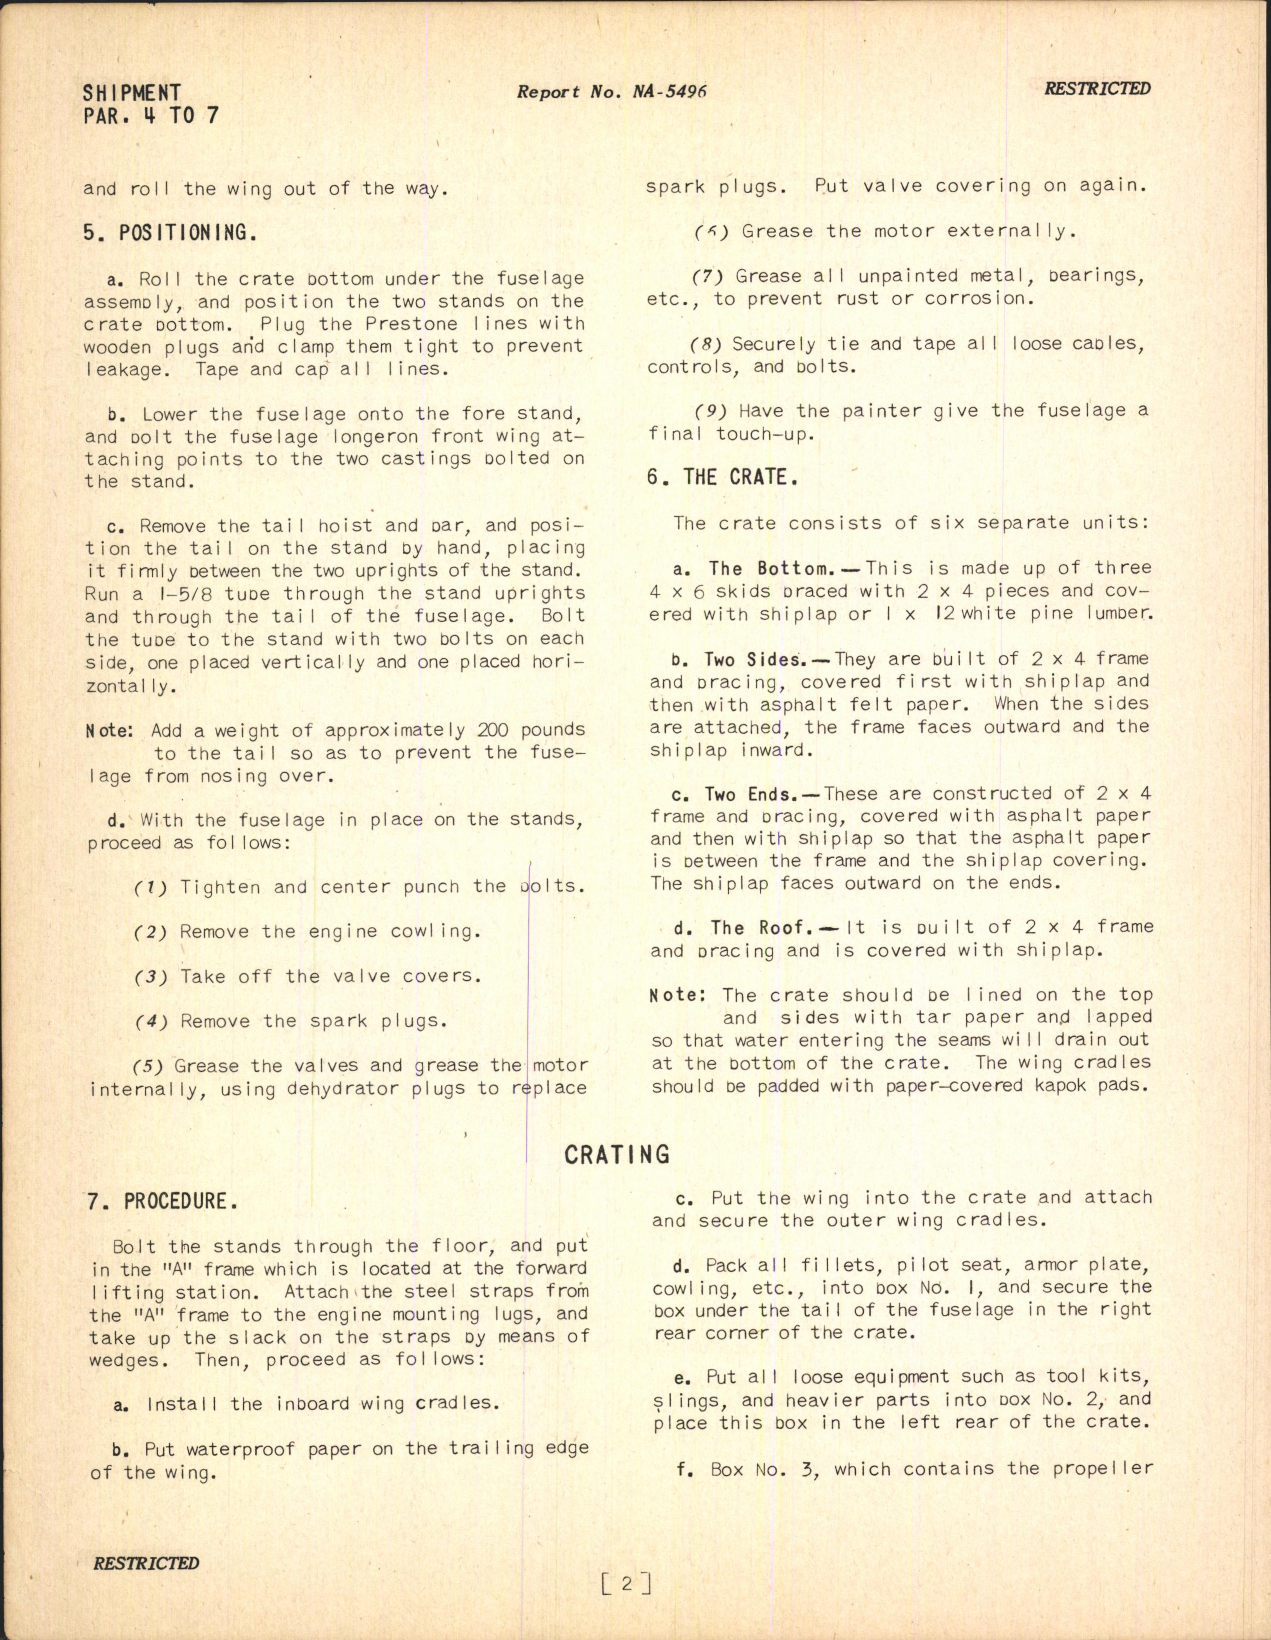 Sample page 8 from AirCorps Library document: Preliminary Service & Maintenance Instructions Handbook for the Fighter-Divebomber Model A-36A